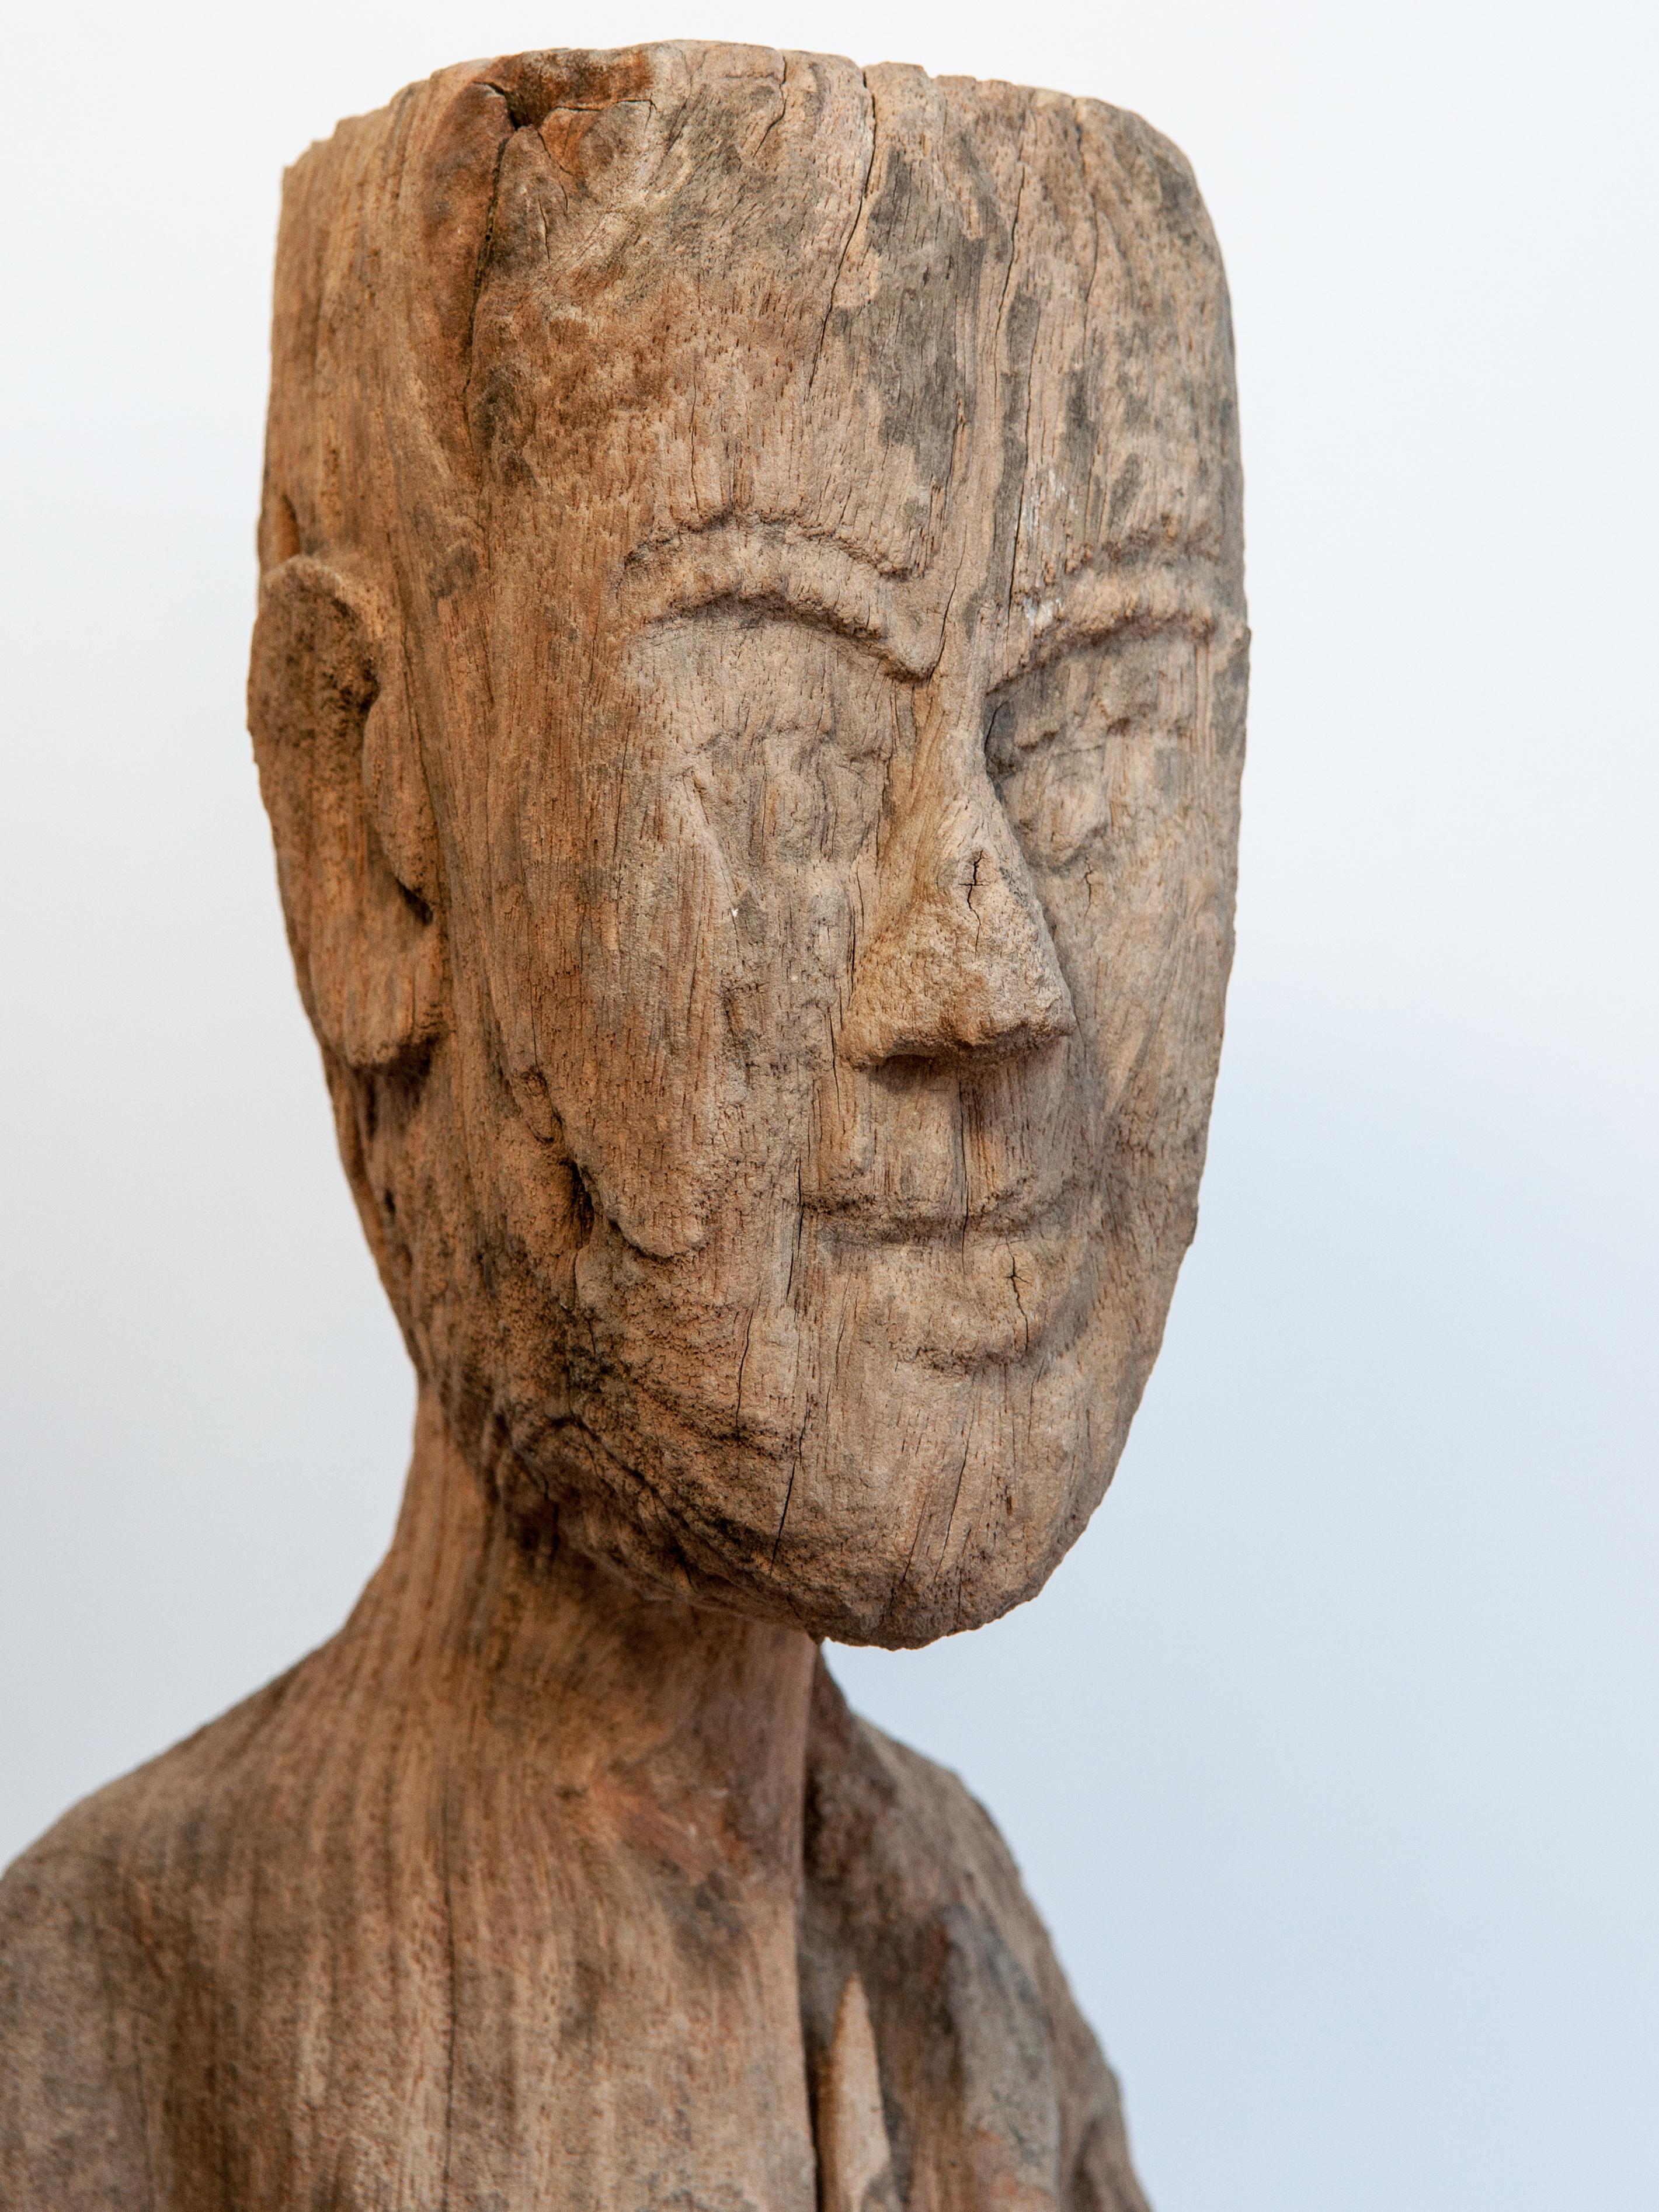 Old carved wooden figure. South or Southwest China, early 20th century. Mounted.
This is of unknown origin. Possibly hill tribe. Possibly Yao?
Condition: The statue has clearly been exposed to the elements and has experienced significant